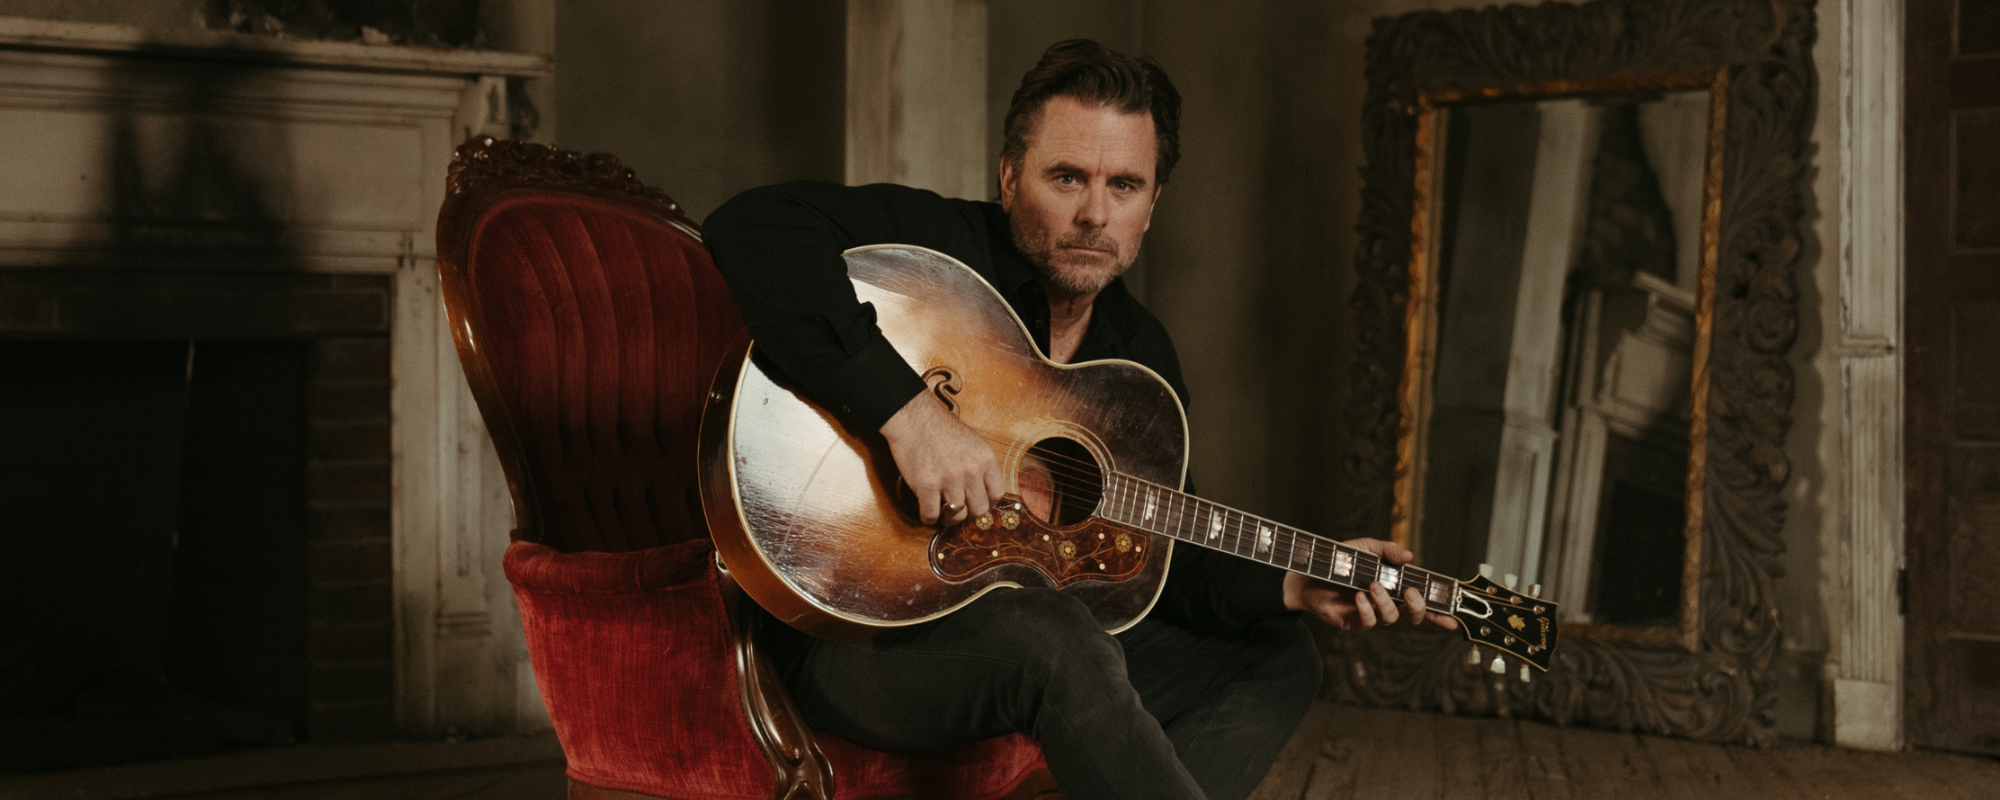 Charles Esten Talks the Meaning Behind His Emotional Track “Somewhere in the Sunshine”